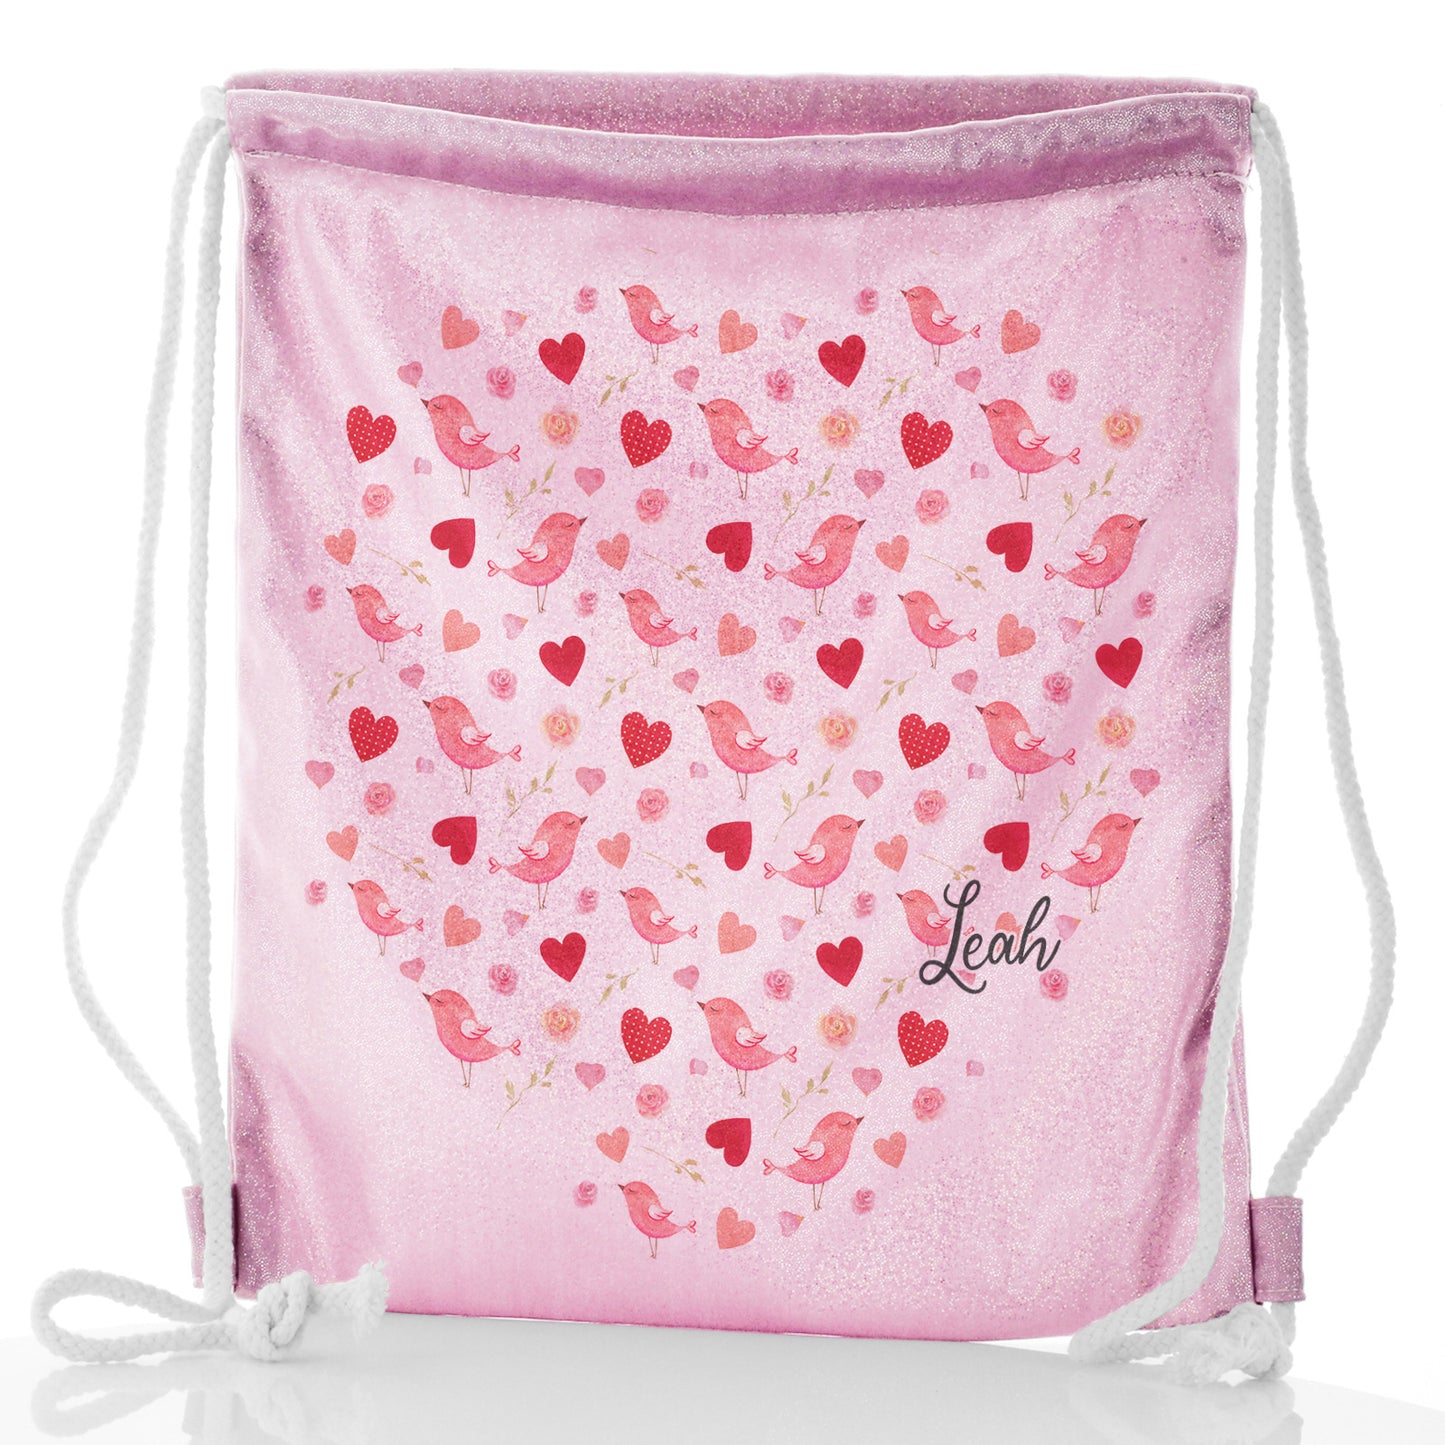 Personalised Glitter Drawstring Backpack with Stylish Text and Love Heart Birds Print